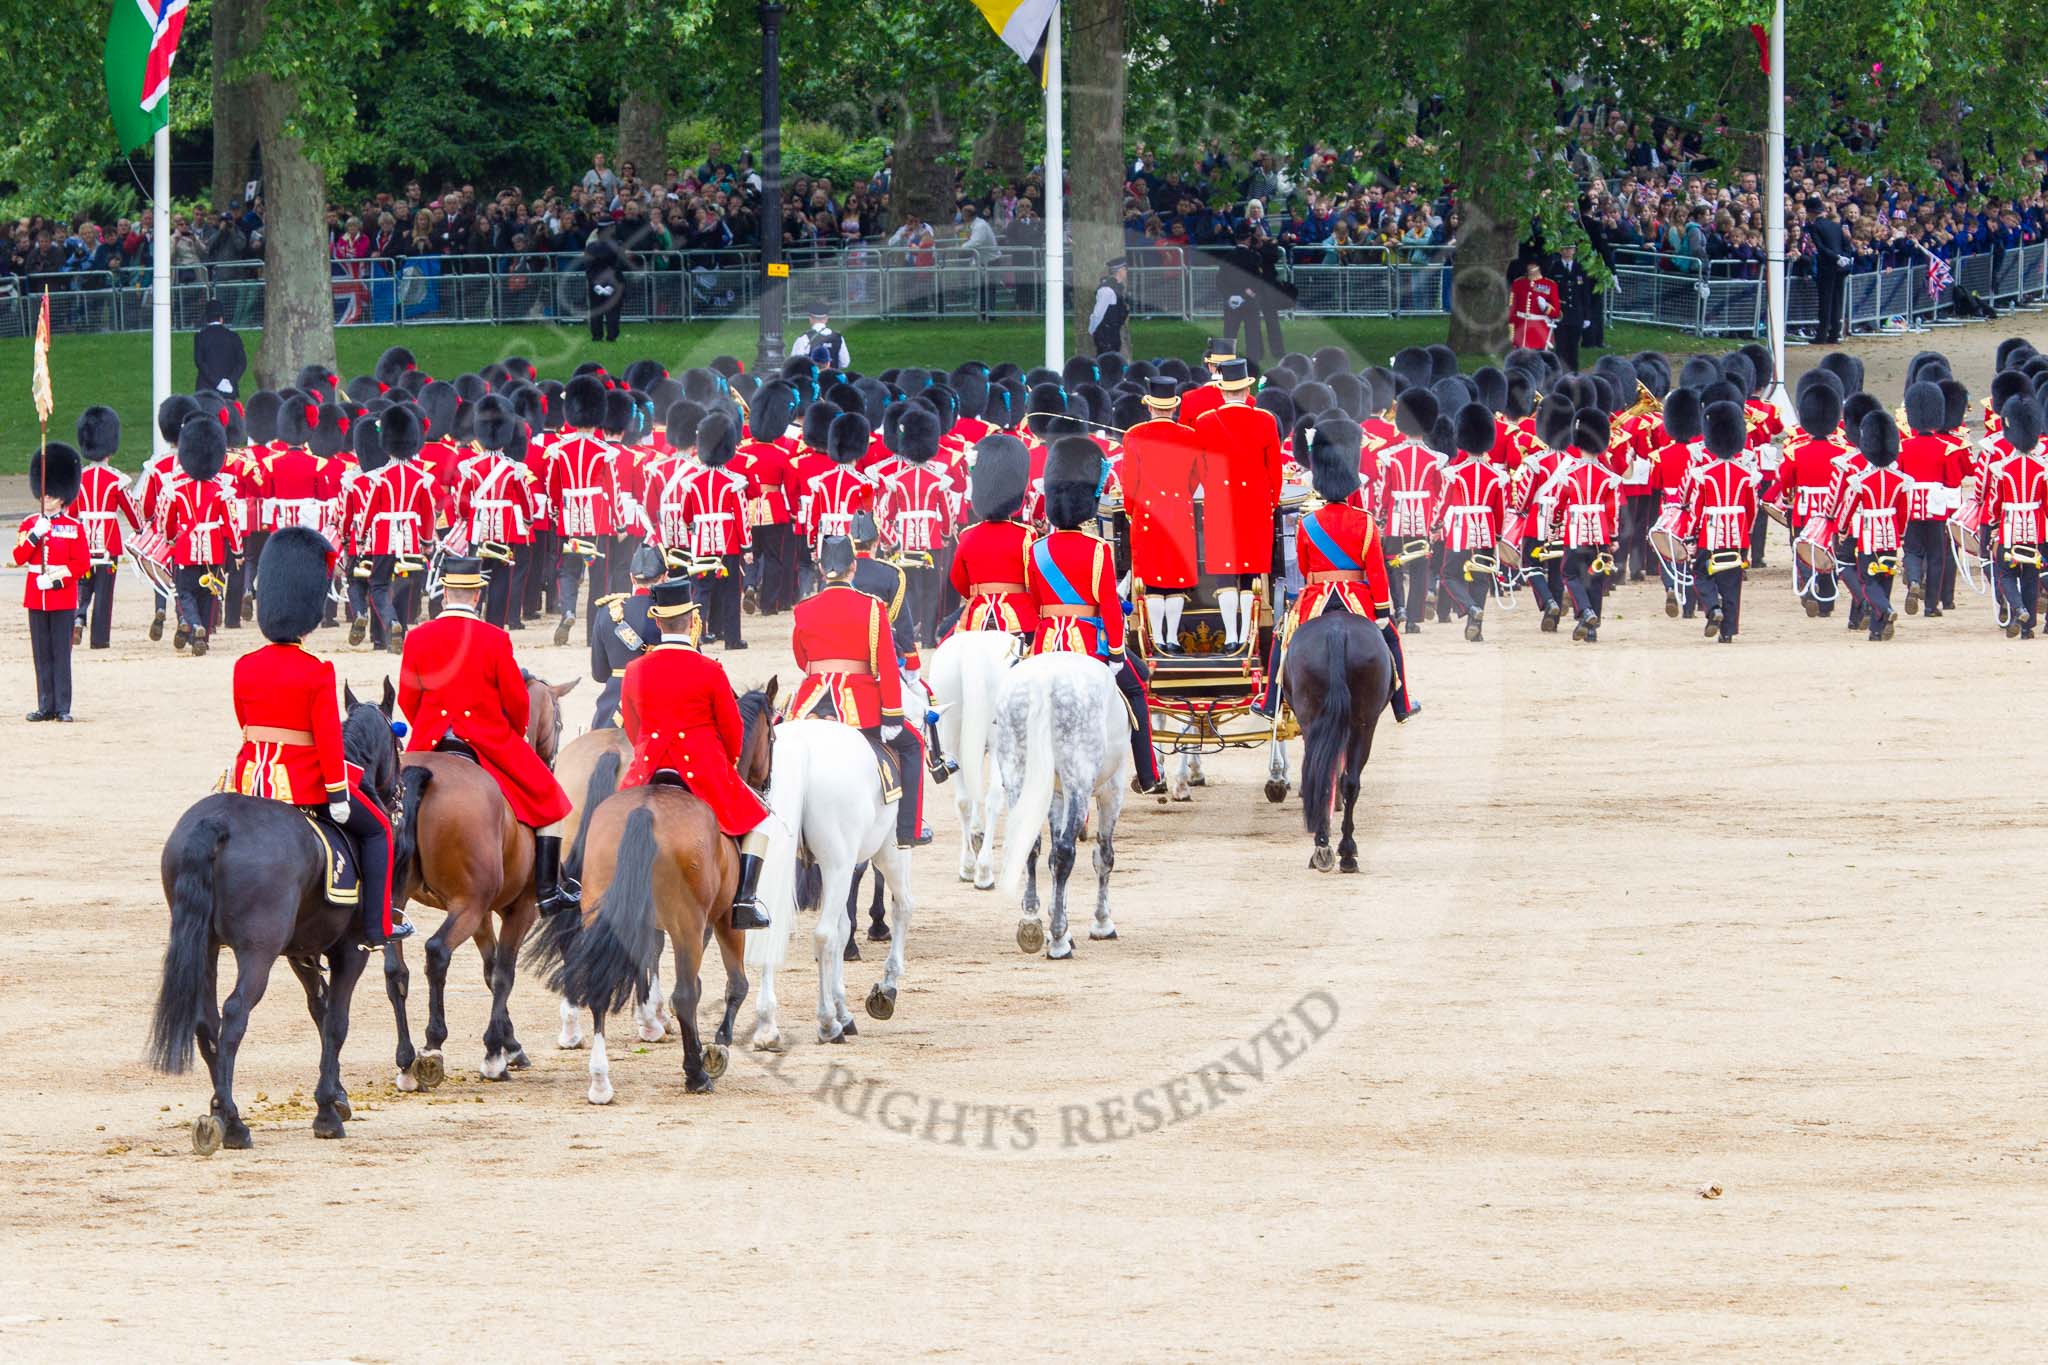 Trooping the Colour 2013: The March Off - the Massed Bands are leaving towards The Mall, followed by the glass coach carrying HM The Queen and HRH The Duke of Kent. Behind the glass coach the Royal Colonels. Image #834, 15 June 2013 12:11 Horse Guards Parade, London, UK